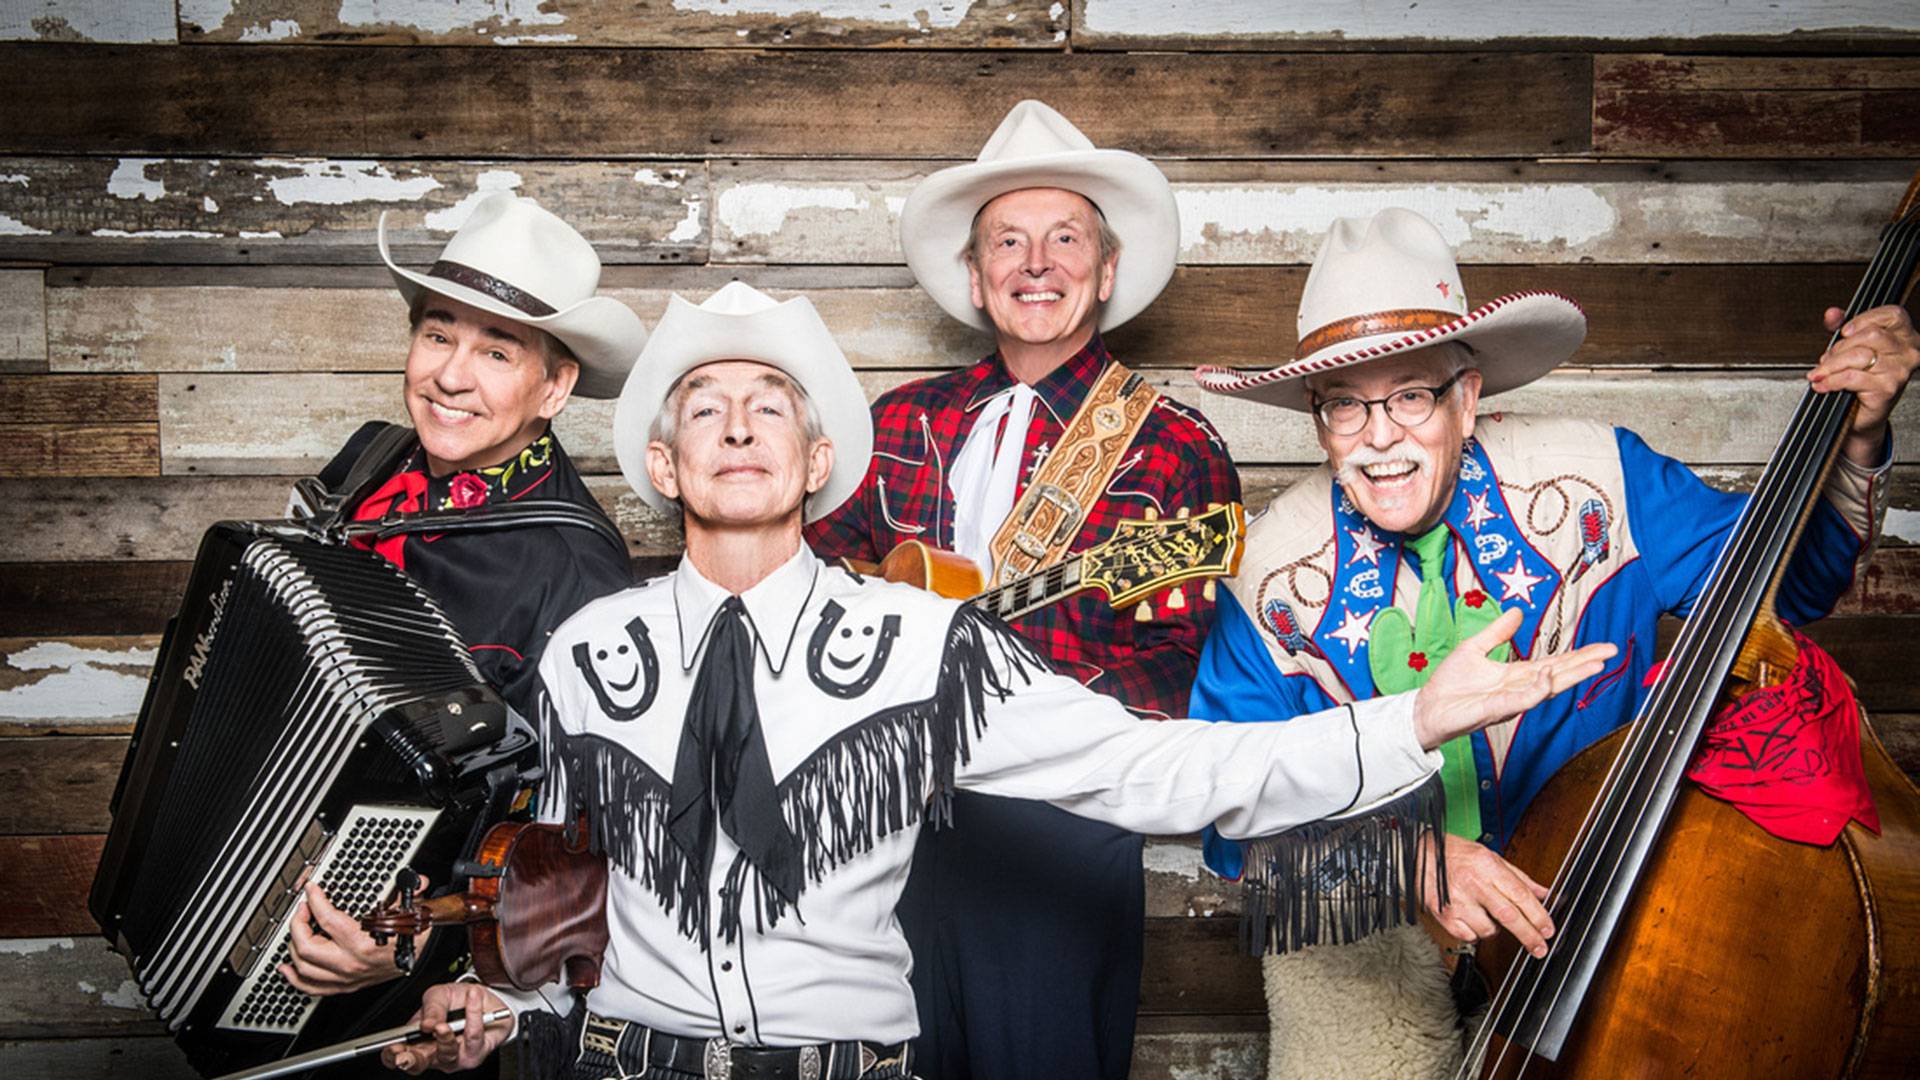 Riders in the Sky bring Western swing, cowboy comedy to Bayou Theater